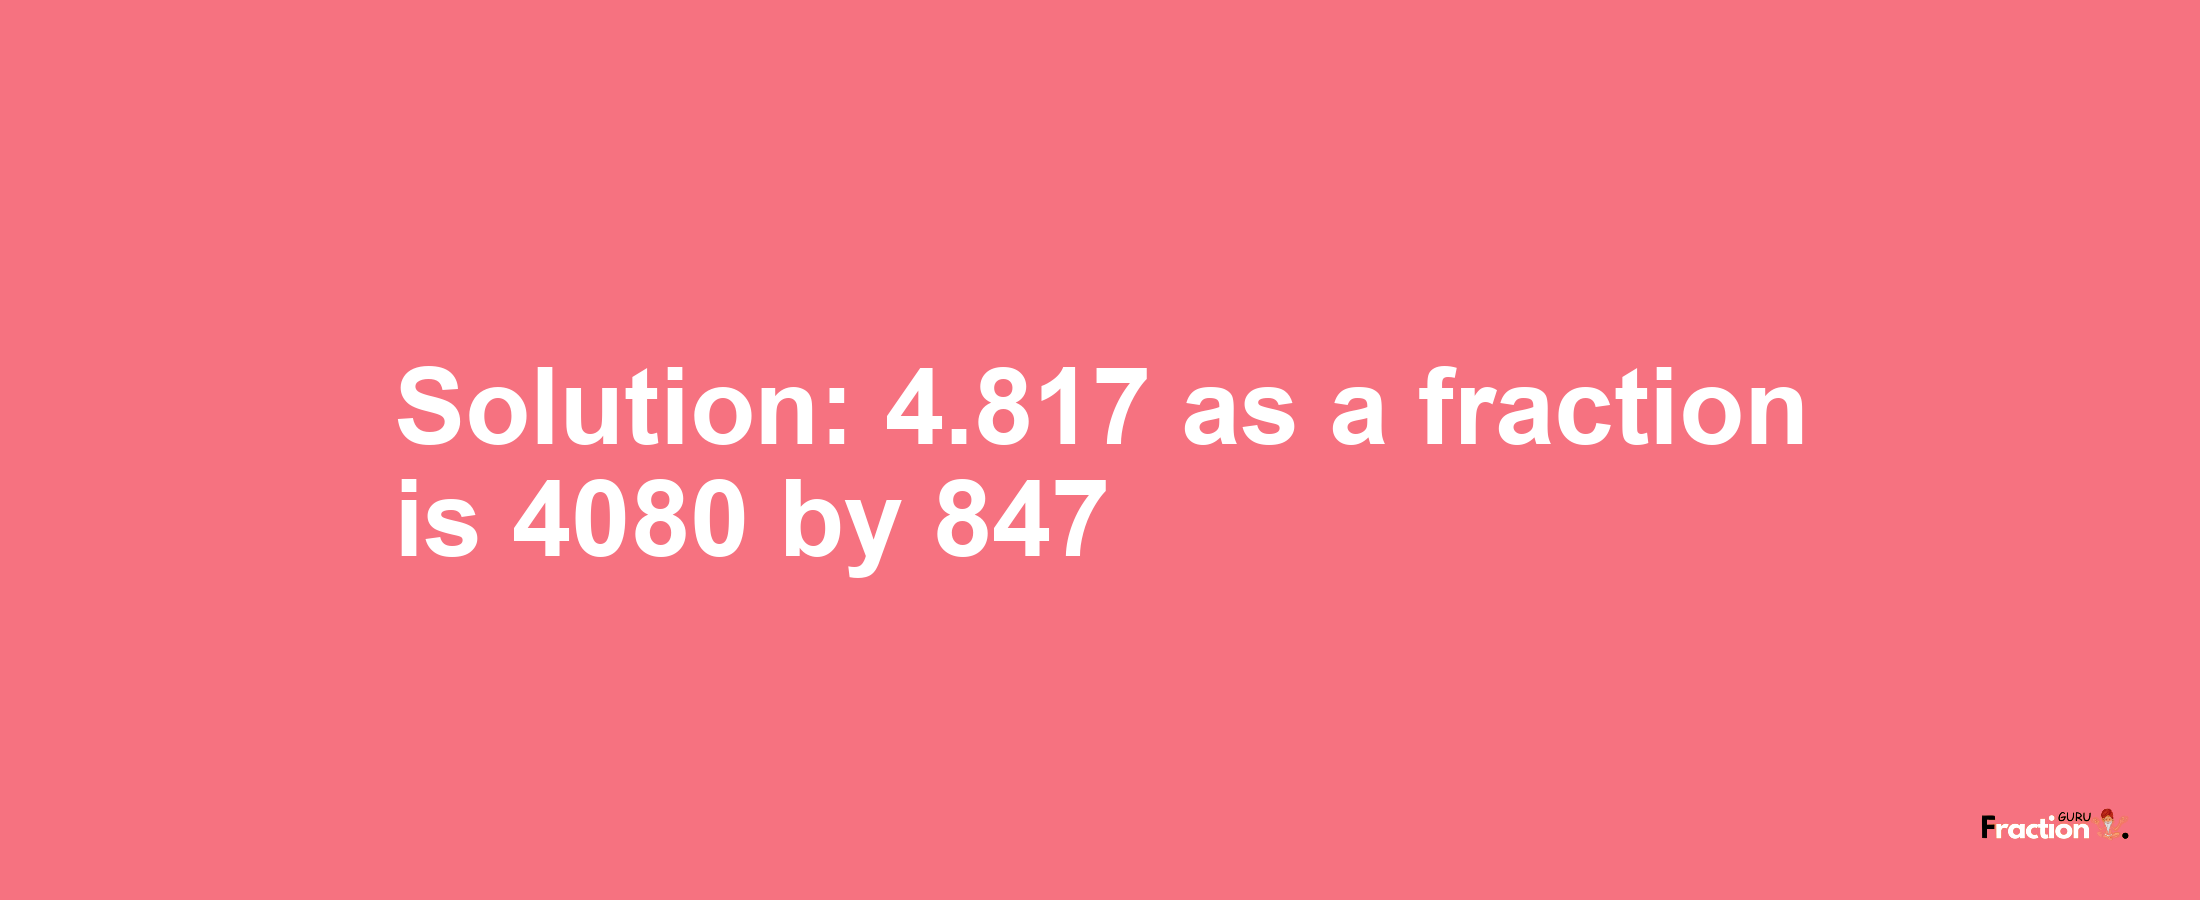 Solution:4.817 as a fraction is 4080/847